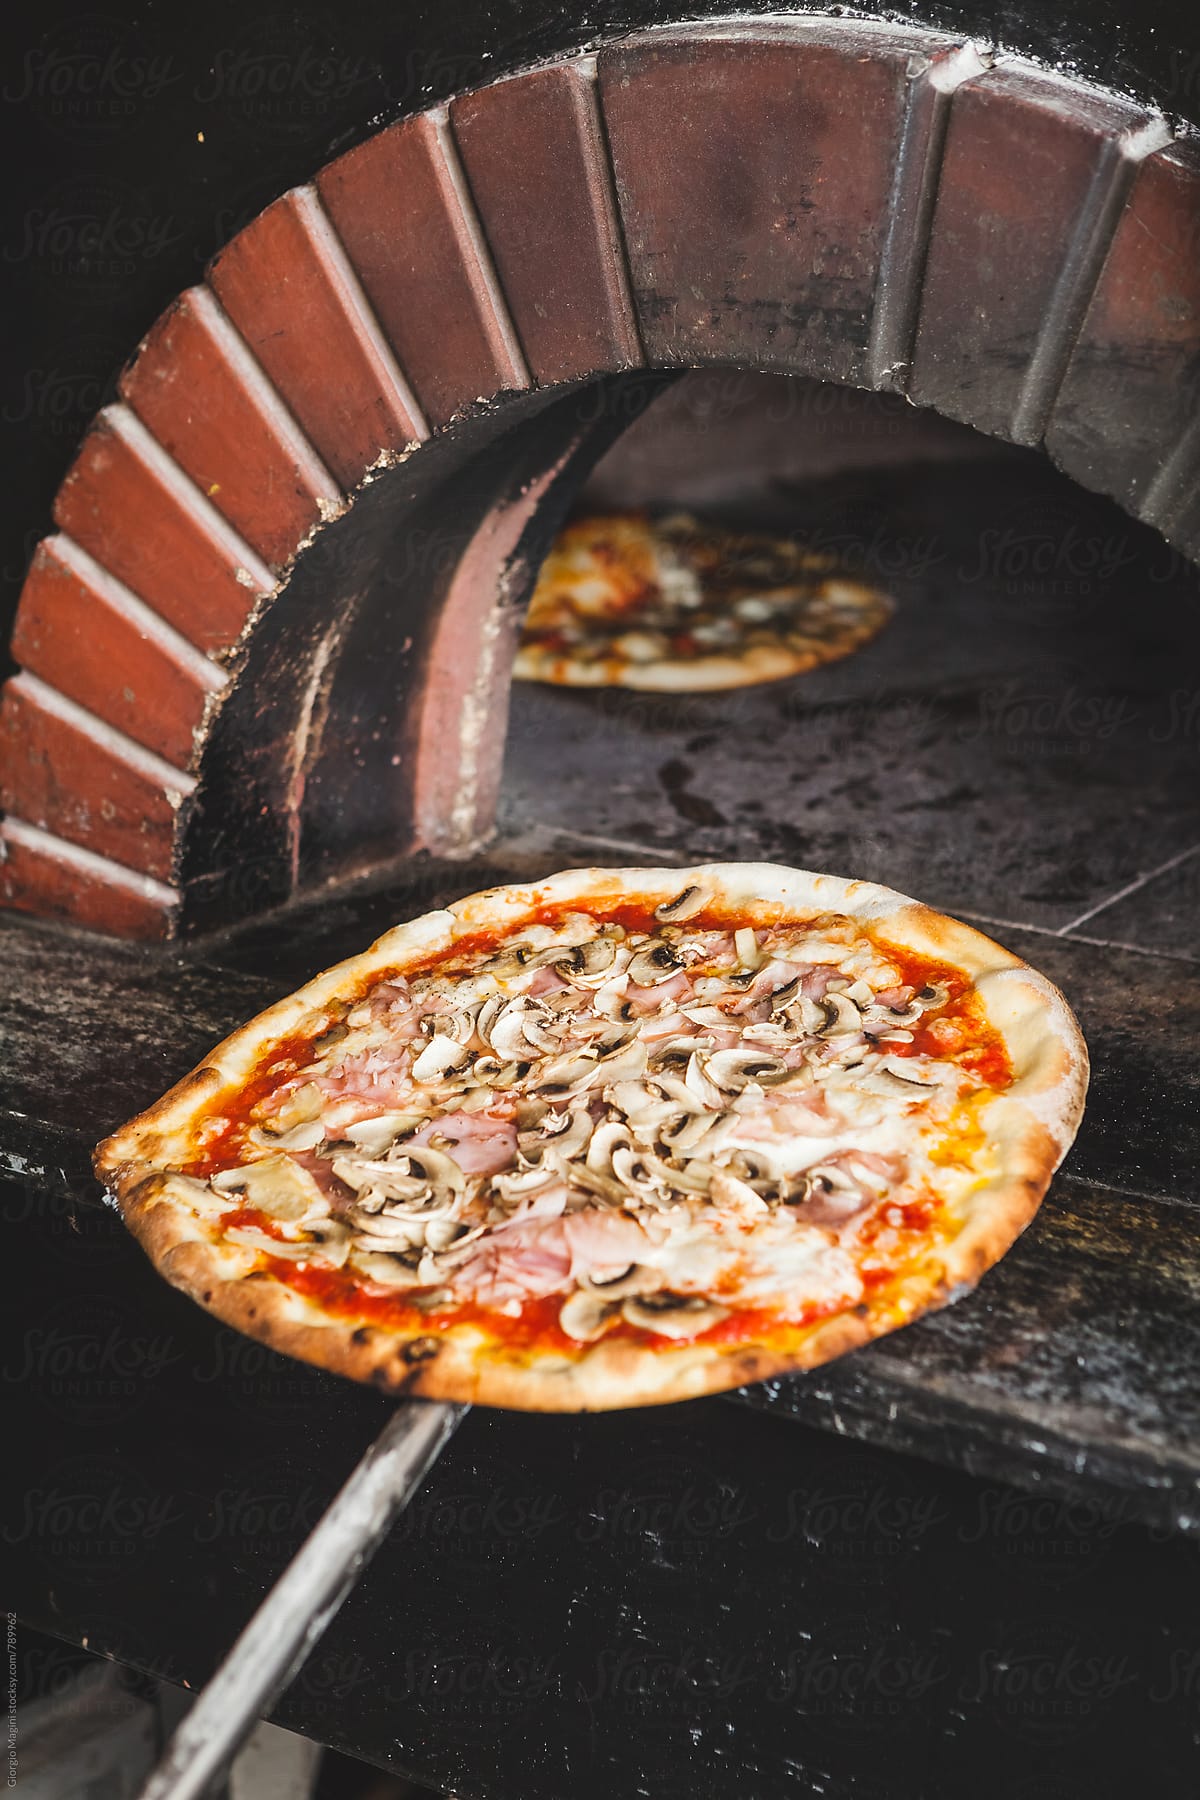 Baked Pizza on a Peel in front of a Wood Oven